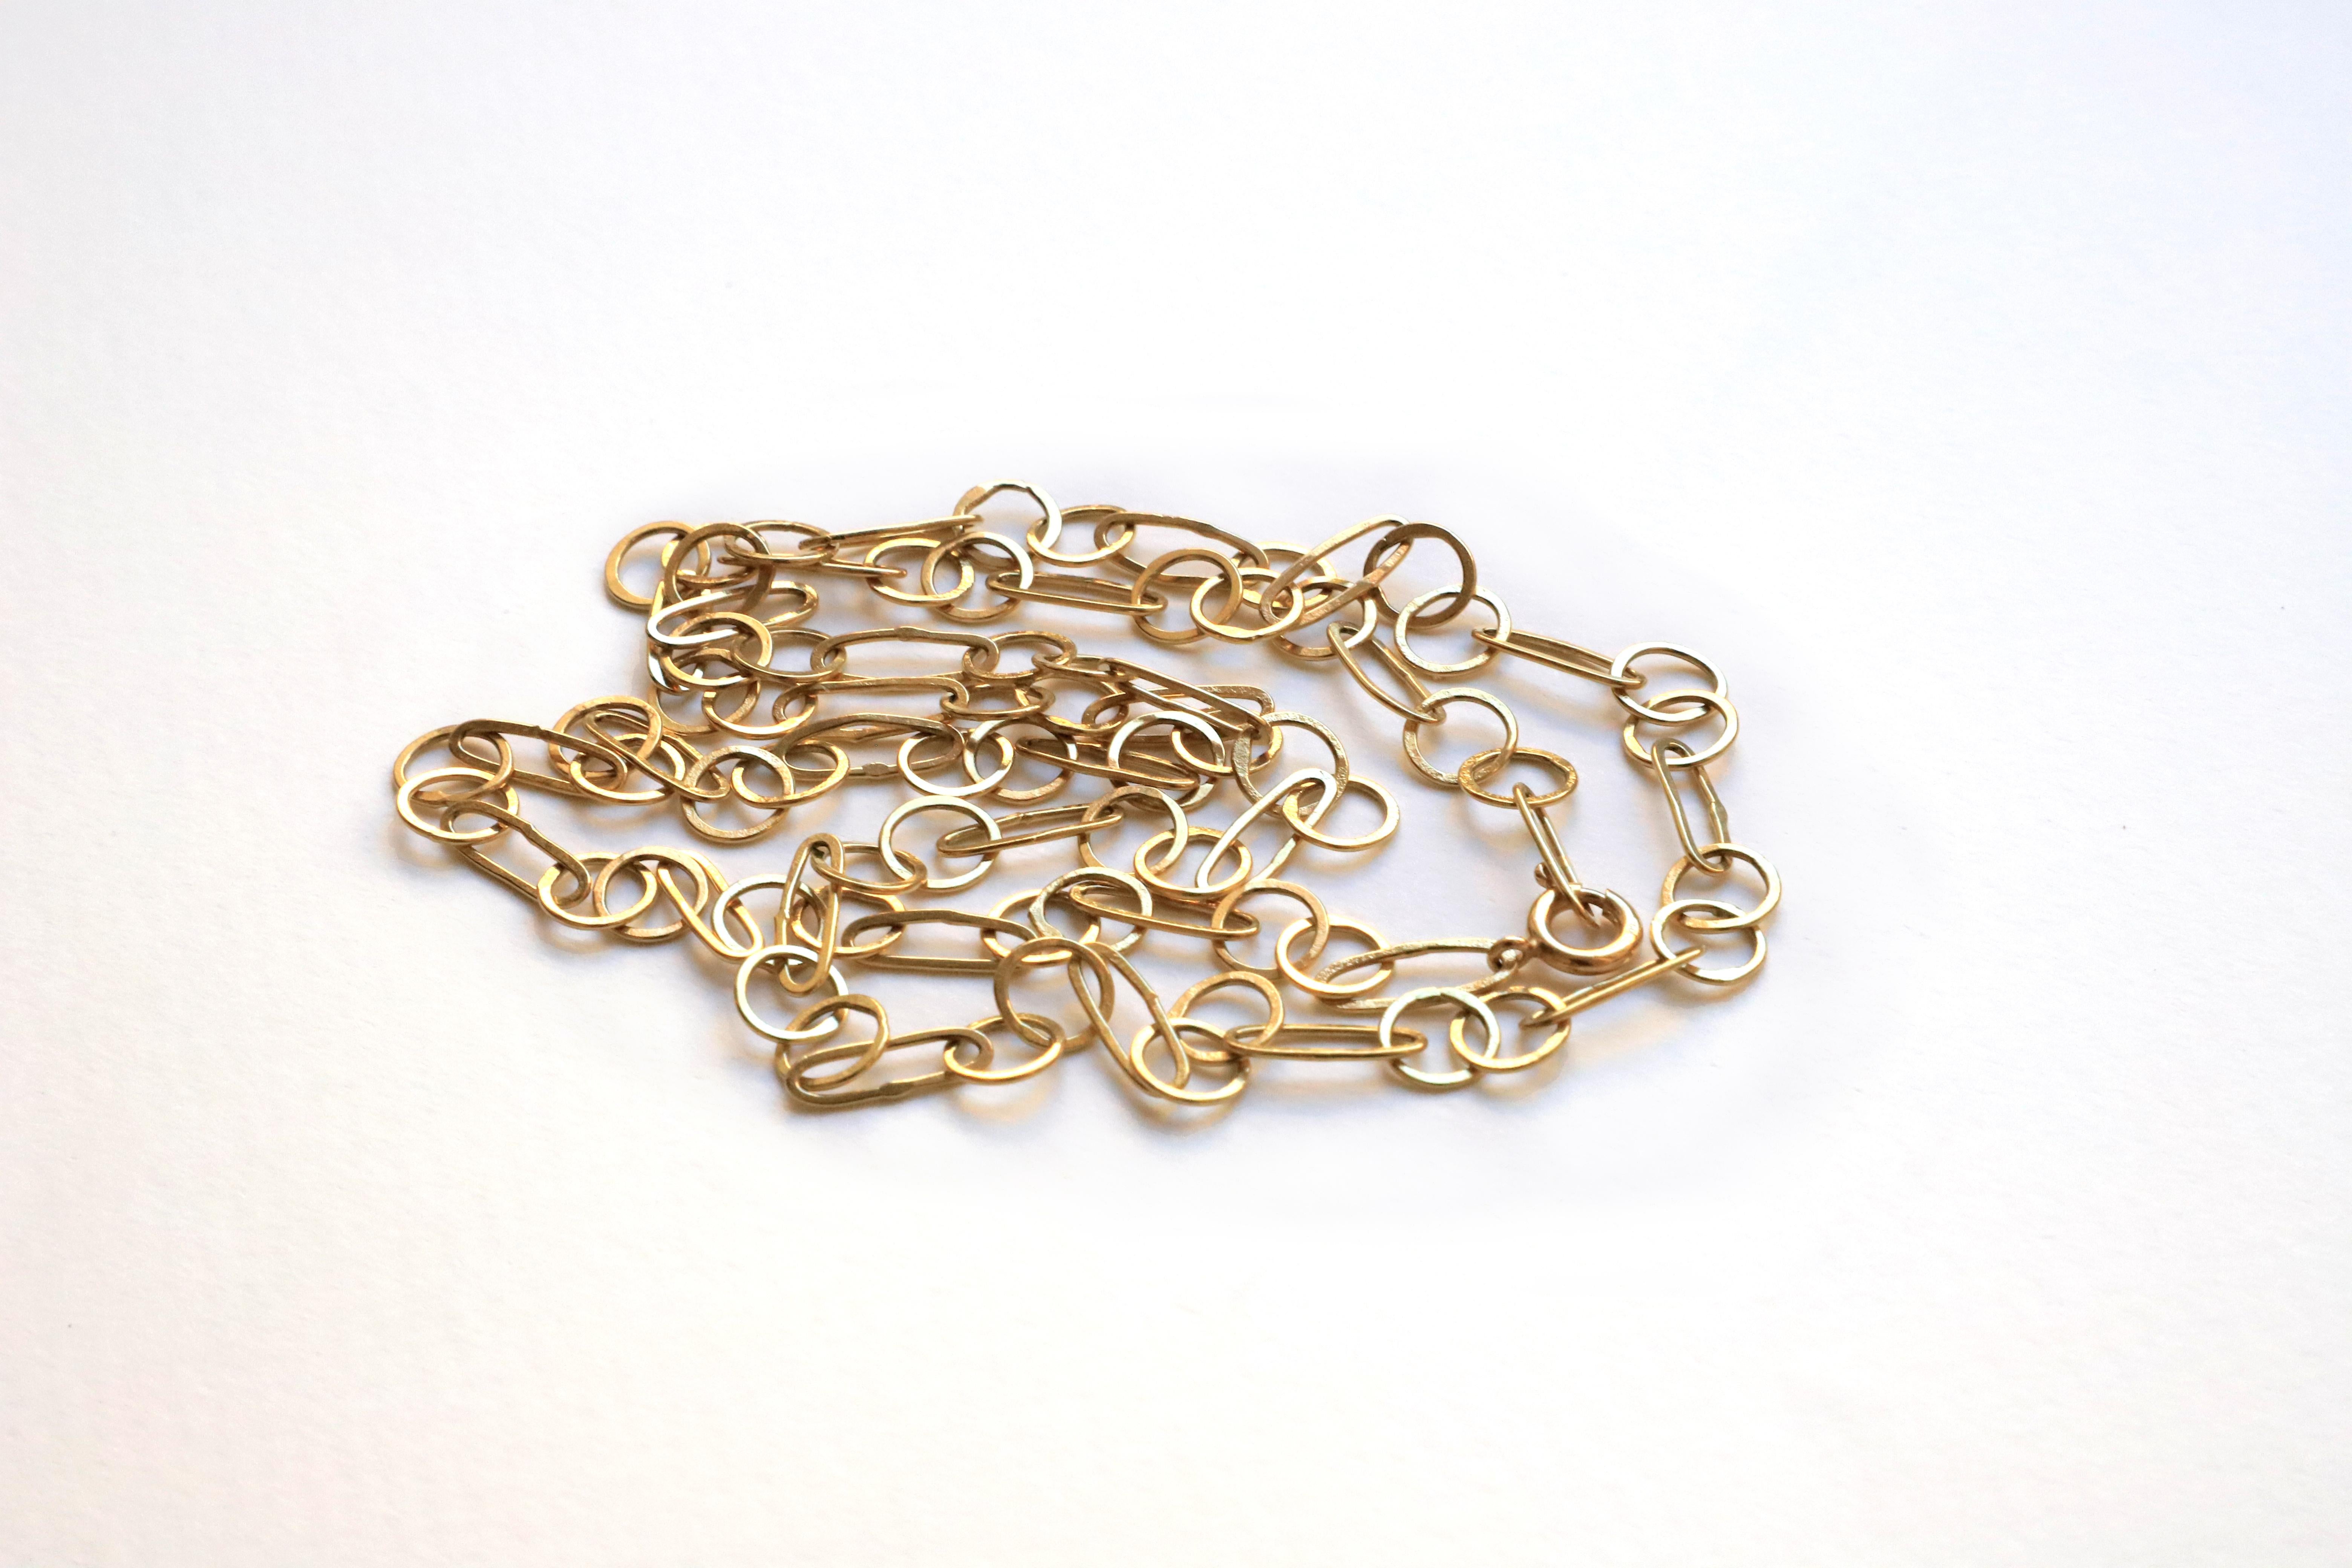 Paperclip Links 18 Karat Yellow Gold Modern Handmade Slightly Hammered Necklace
Here there is an luminous chain links necklace handcrafted in 18 karats yellow gold. Simple yet versatile, easy to match with a variety of outfits. 
This simple necklace